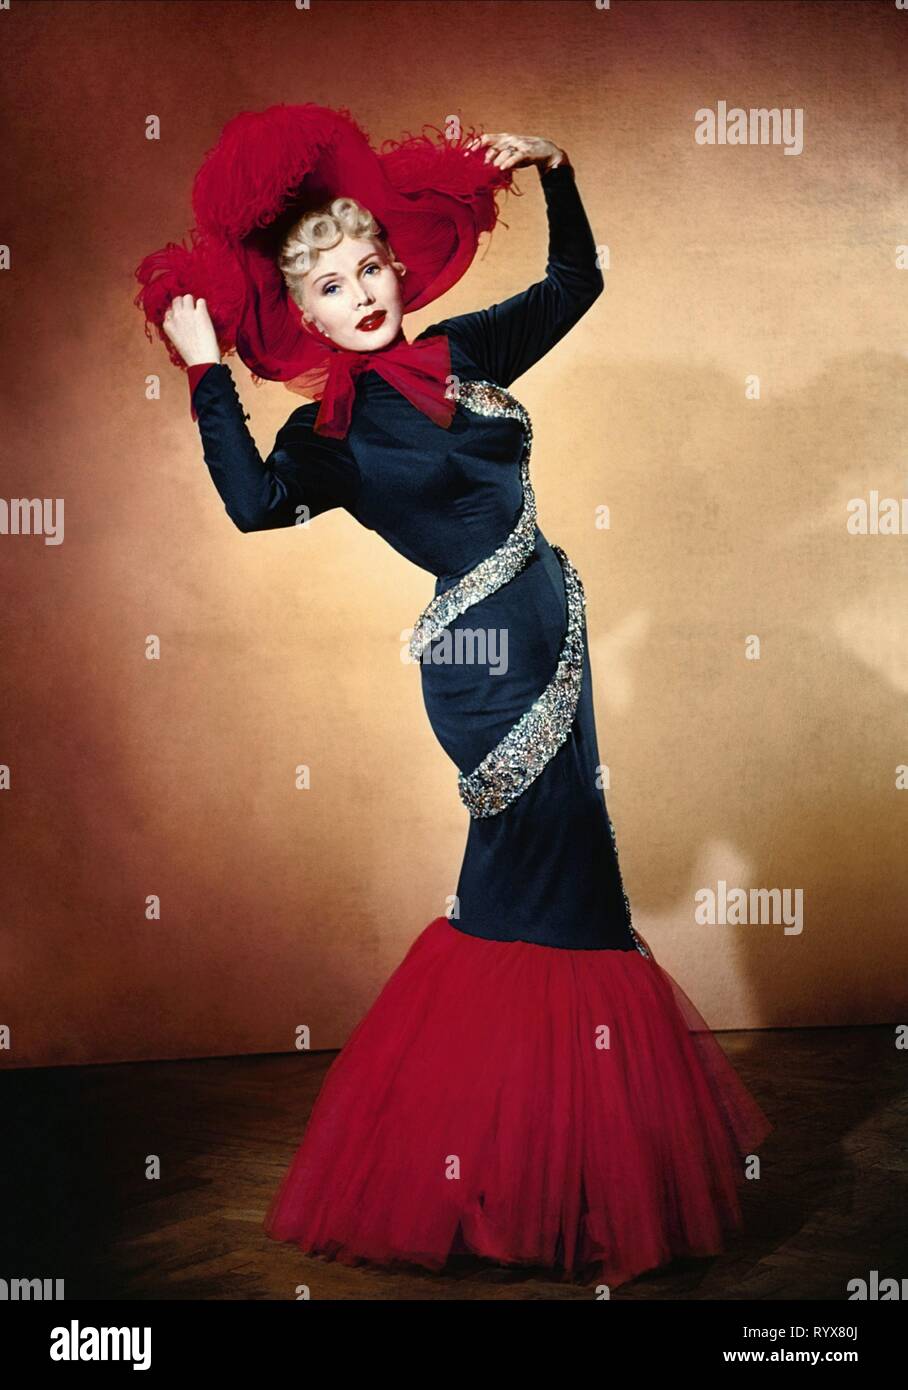 ZSA ZSA GABOR, MOULIN ROUGE, 1952 Stockfoto